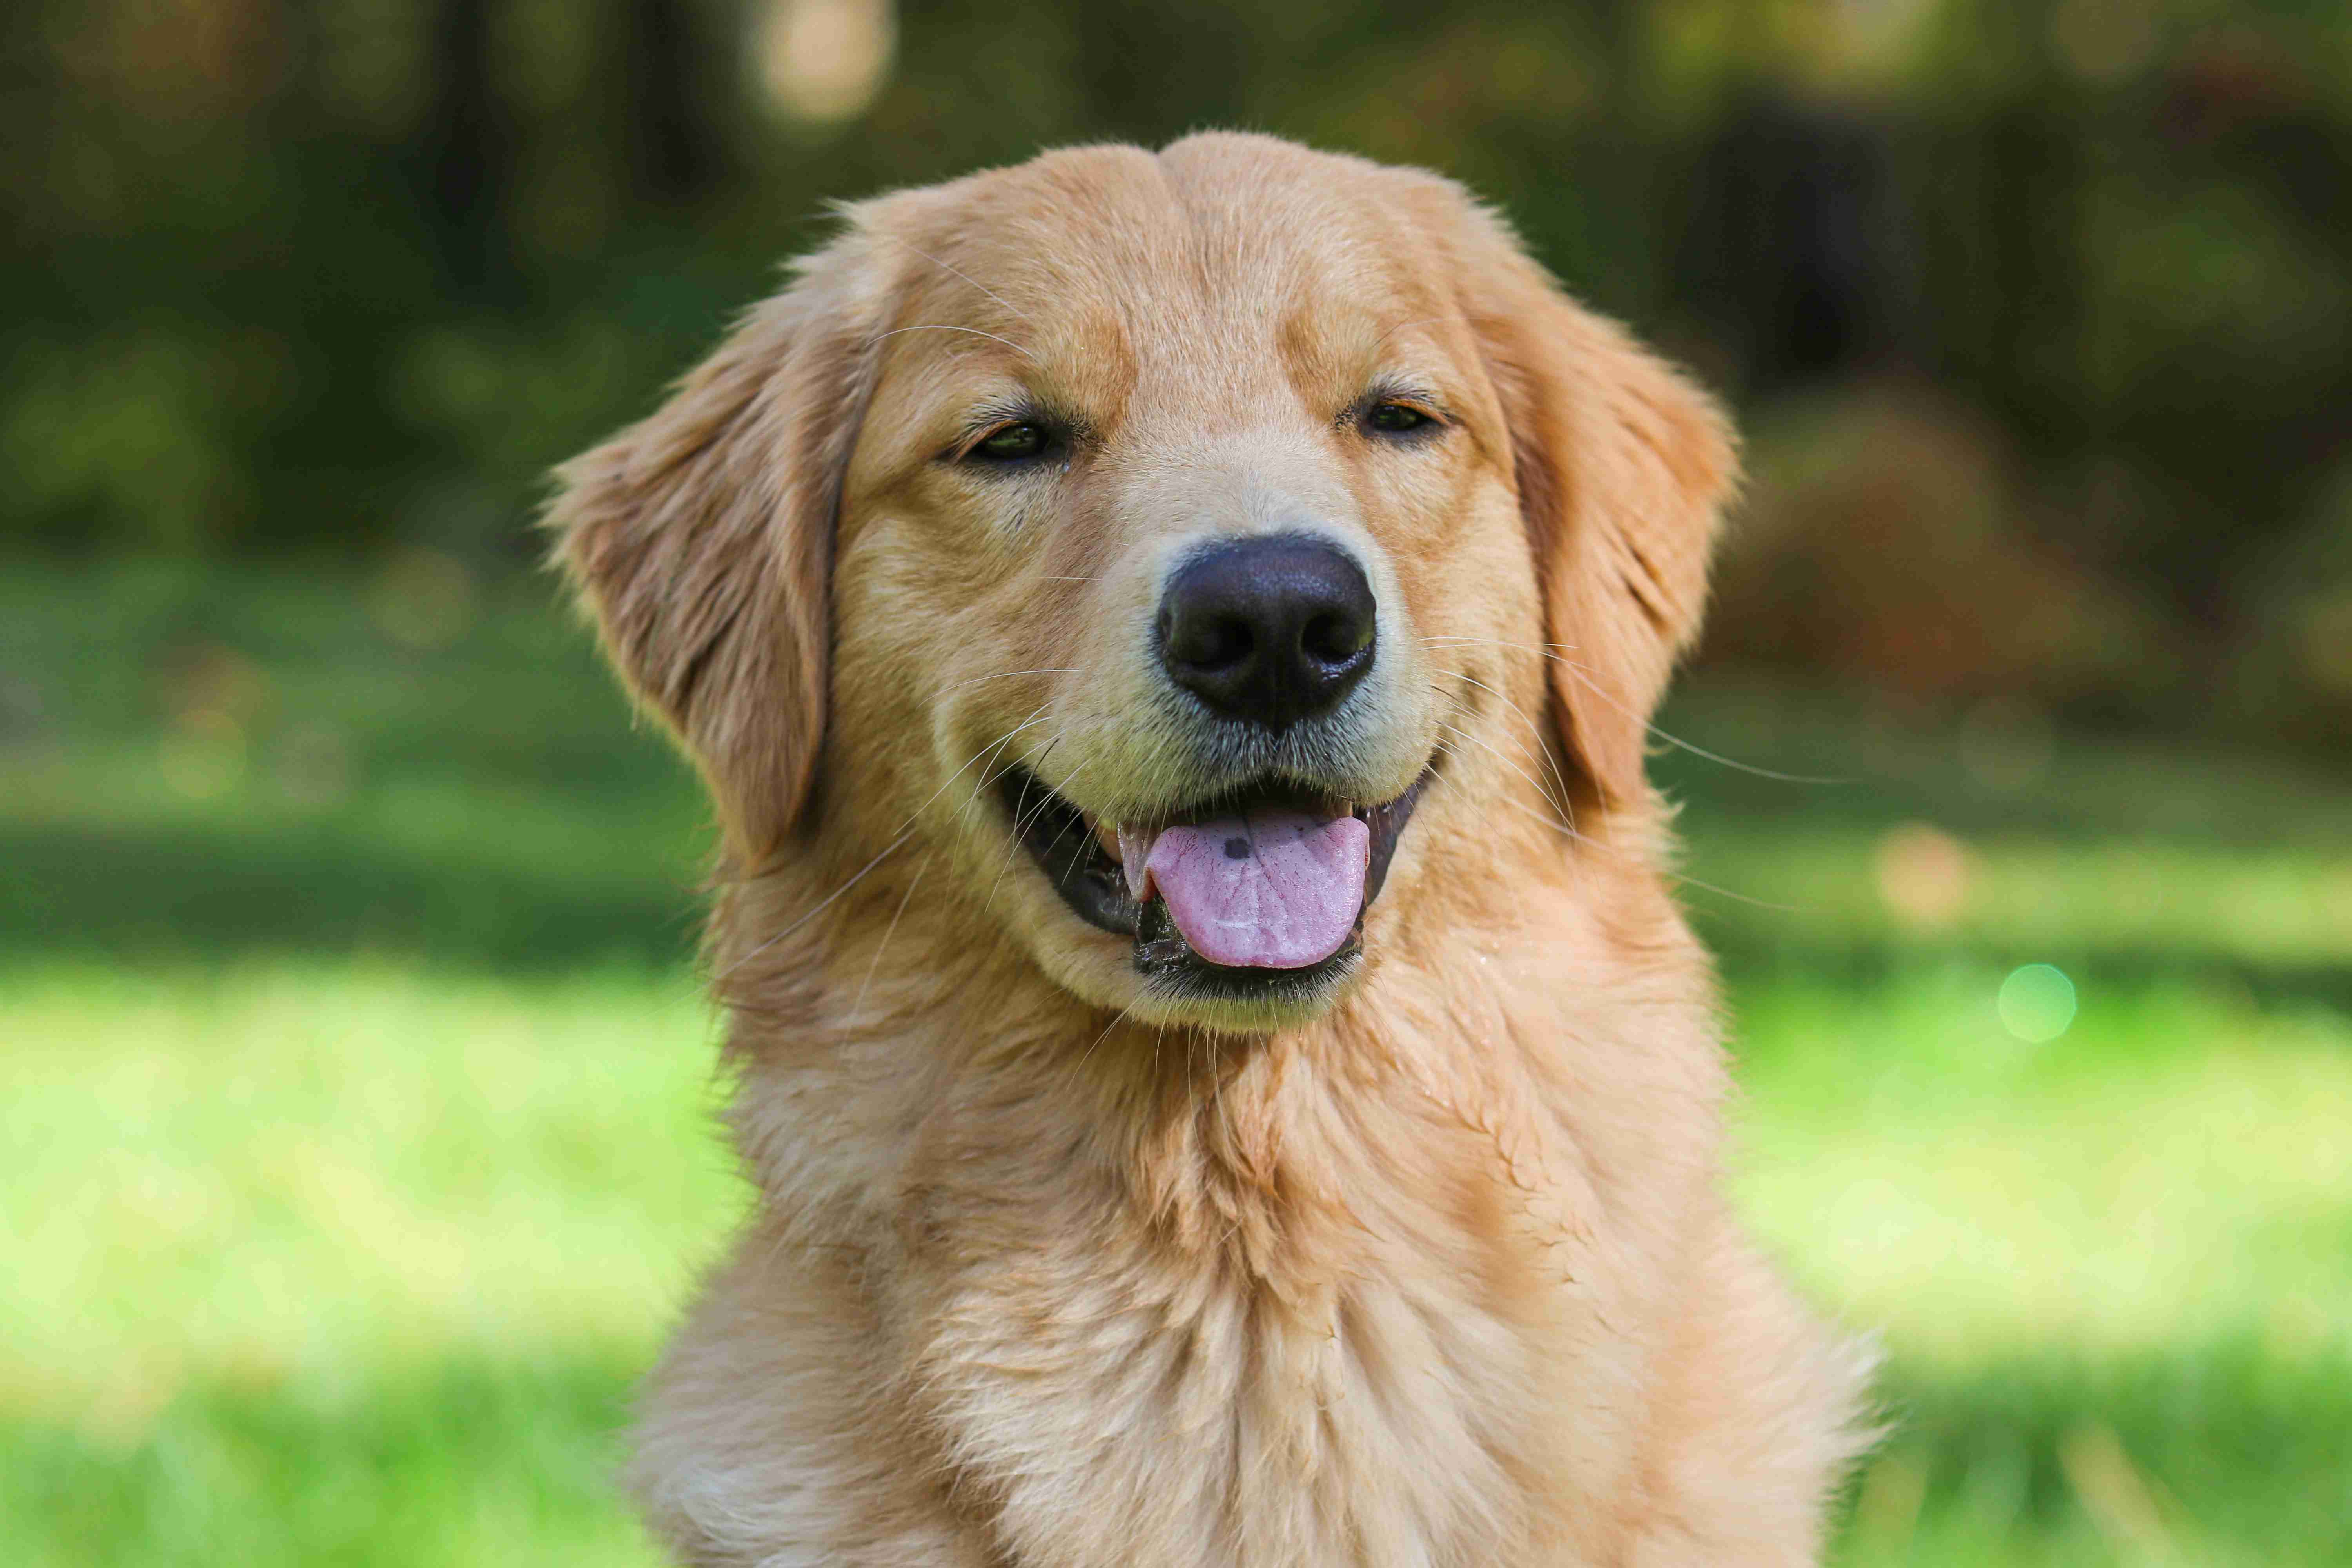 How can I help my golden retriever maintain a healthy weight?